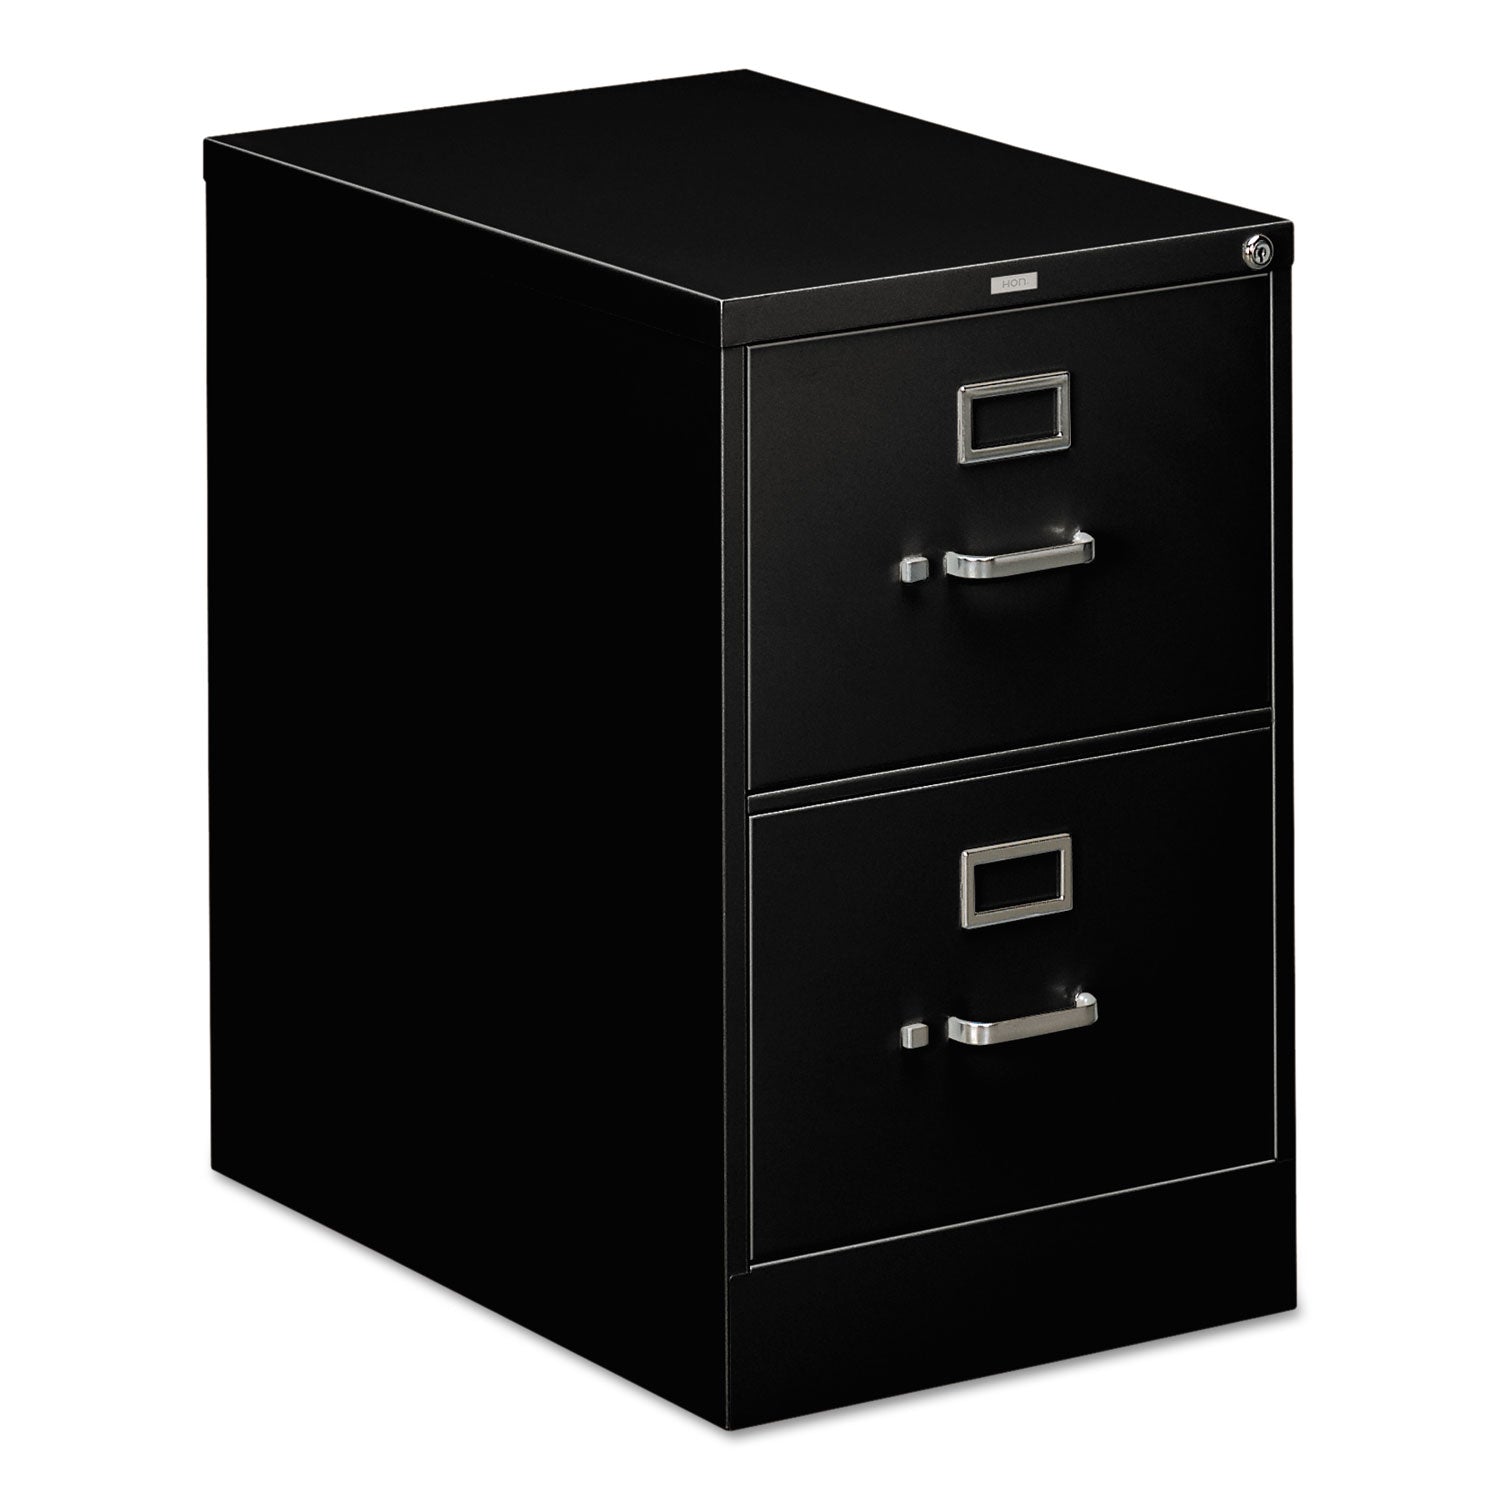 310 Series Vertical File, 2 Legal-Size File Drawers, Black, 18.25" x 26.5" x 29 - 